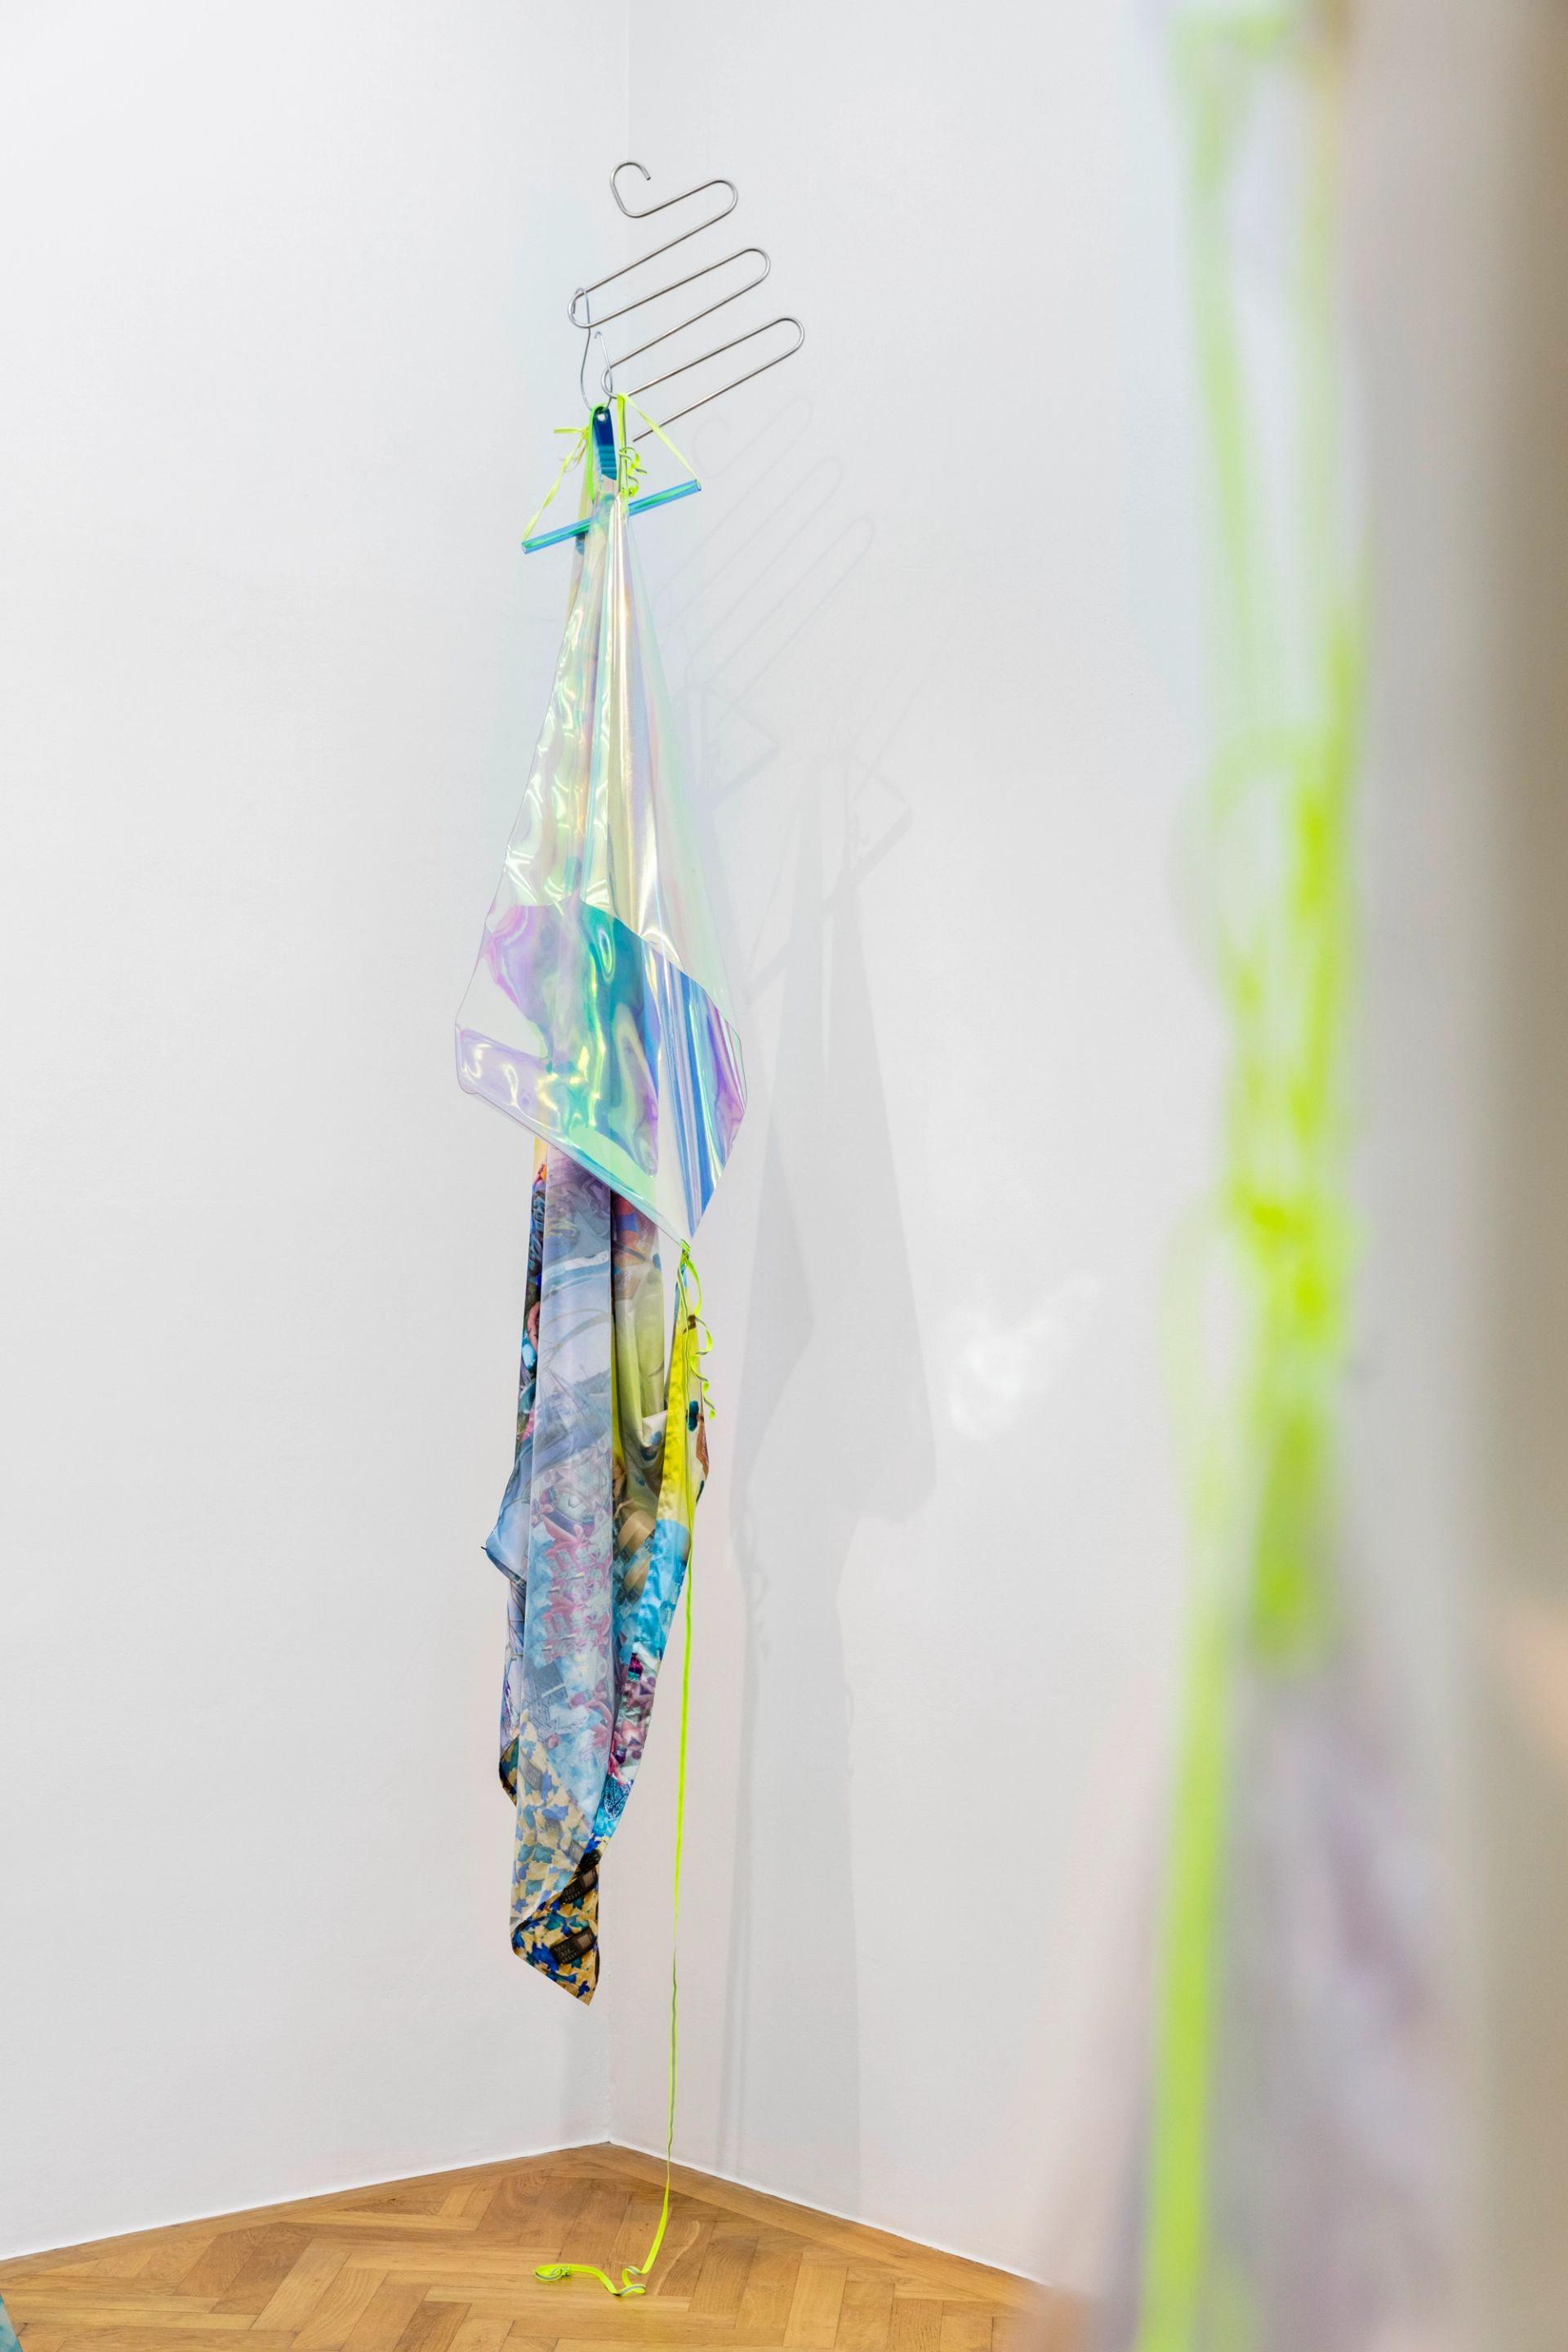 Anna Ehrenstein, Convivial Fiber IV, 2021, Tools for Conviviality, sublimation-print on textiles, pvc, clothing hanger, reflective cord, 190 x 40 x 10 cm